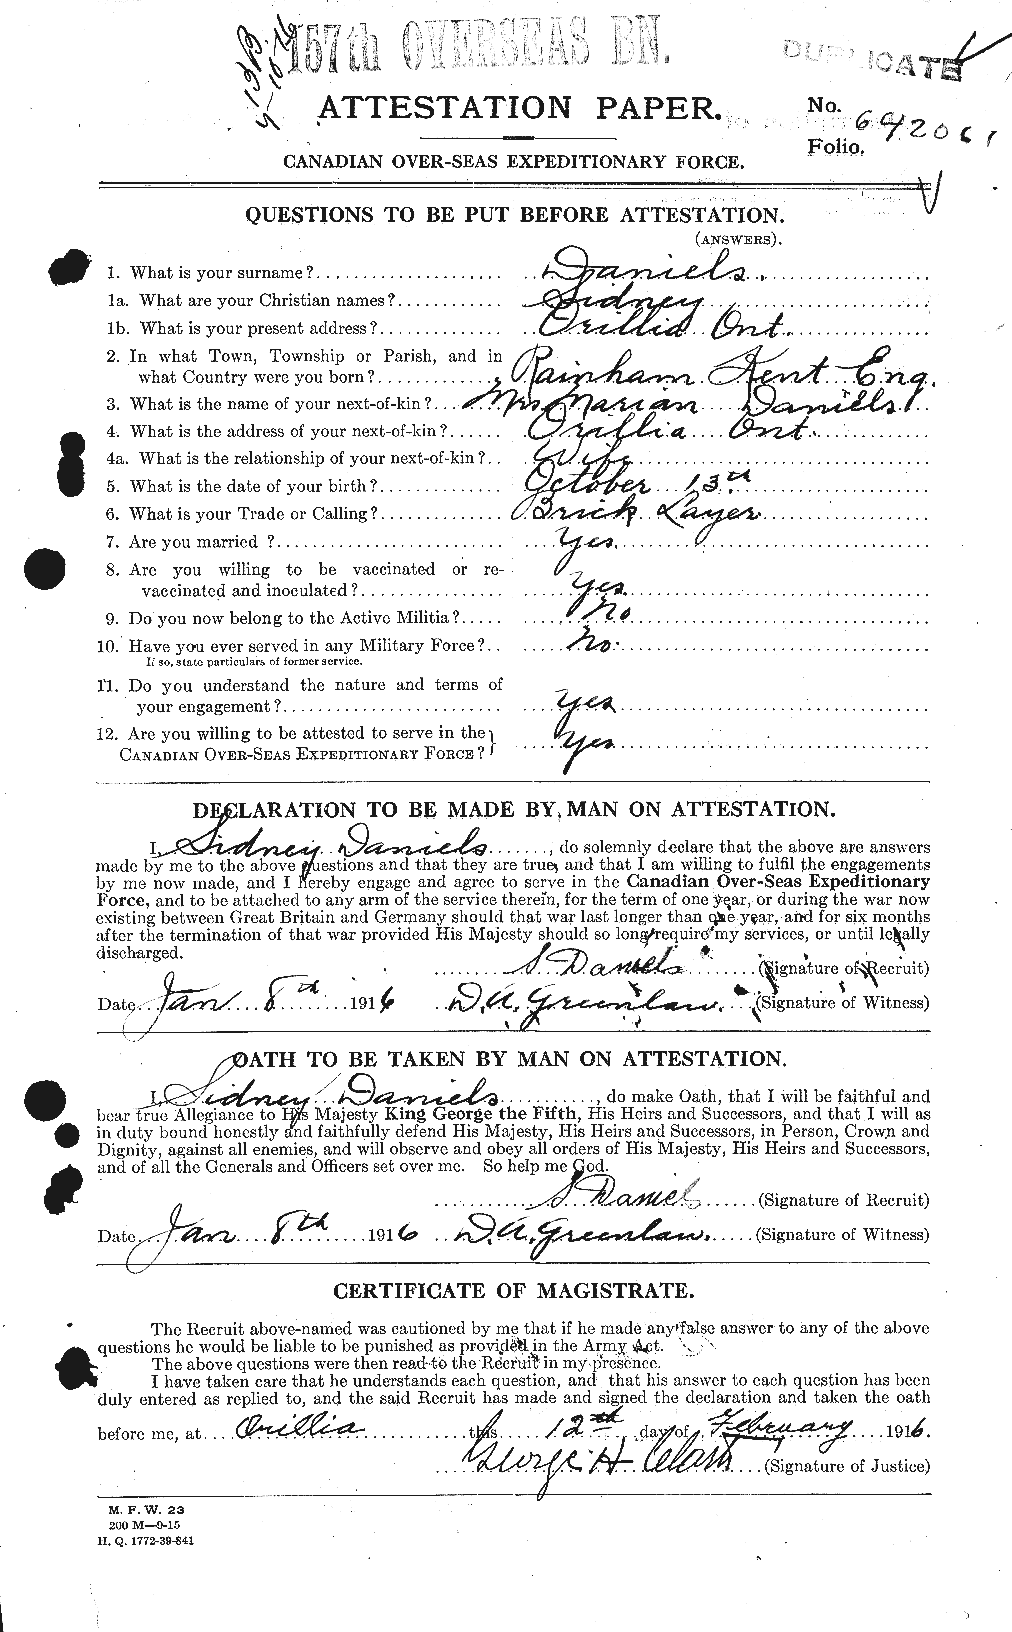 Personnel Records of the First World War - CEF 279671a